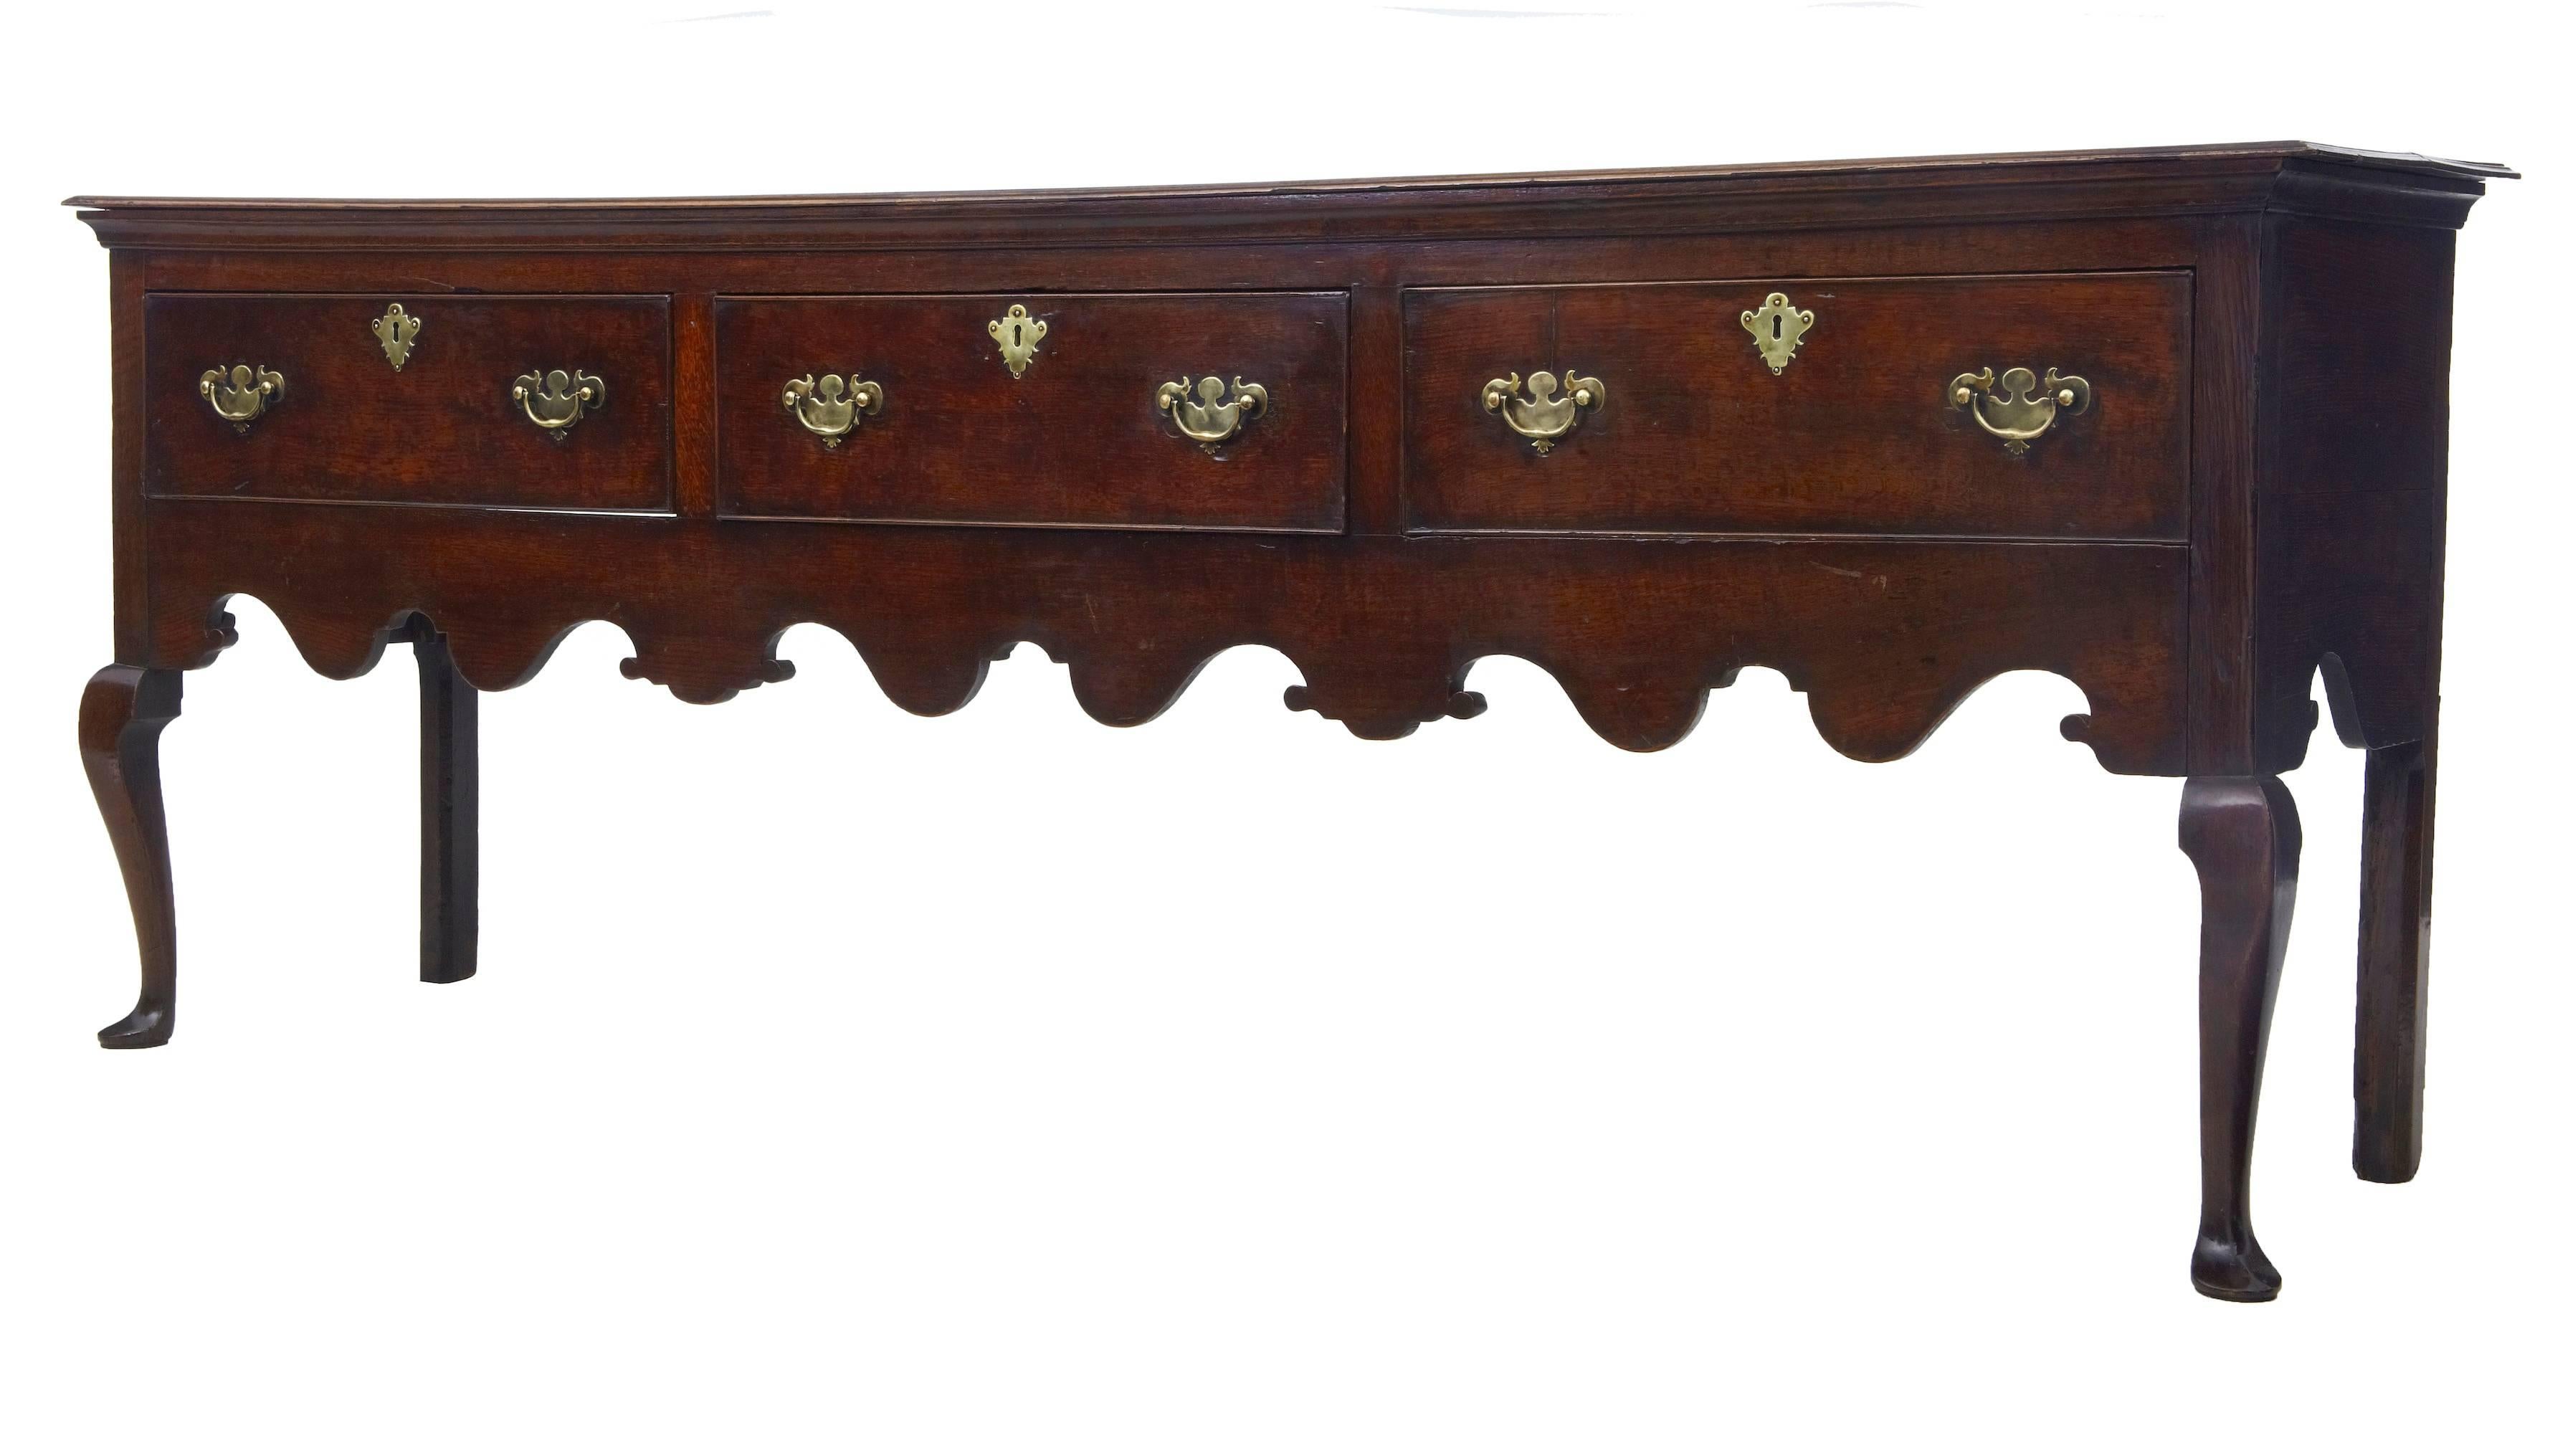 Good quality English dresser base in original condition, circa 1770.
Near 7 foot 6 inches in length.
Three large drawers to the front with cock beaded edging.
Of good color and patina.
Standing on front cabriole legs with pad feet.

Measures: